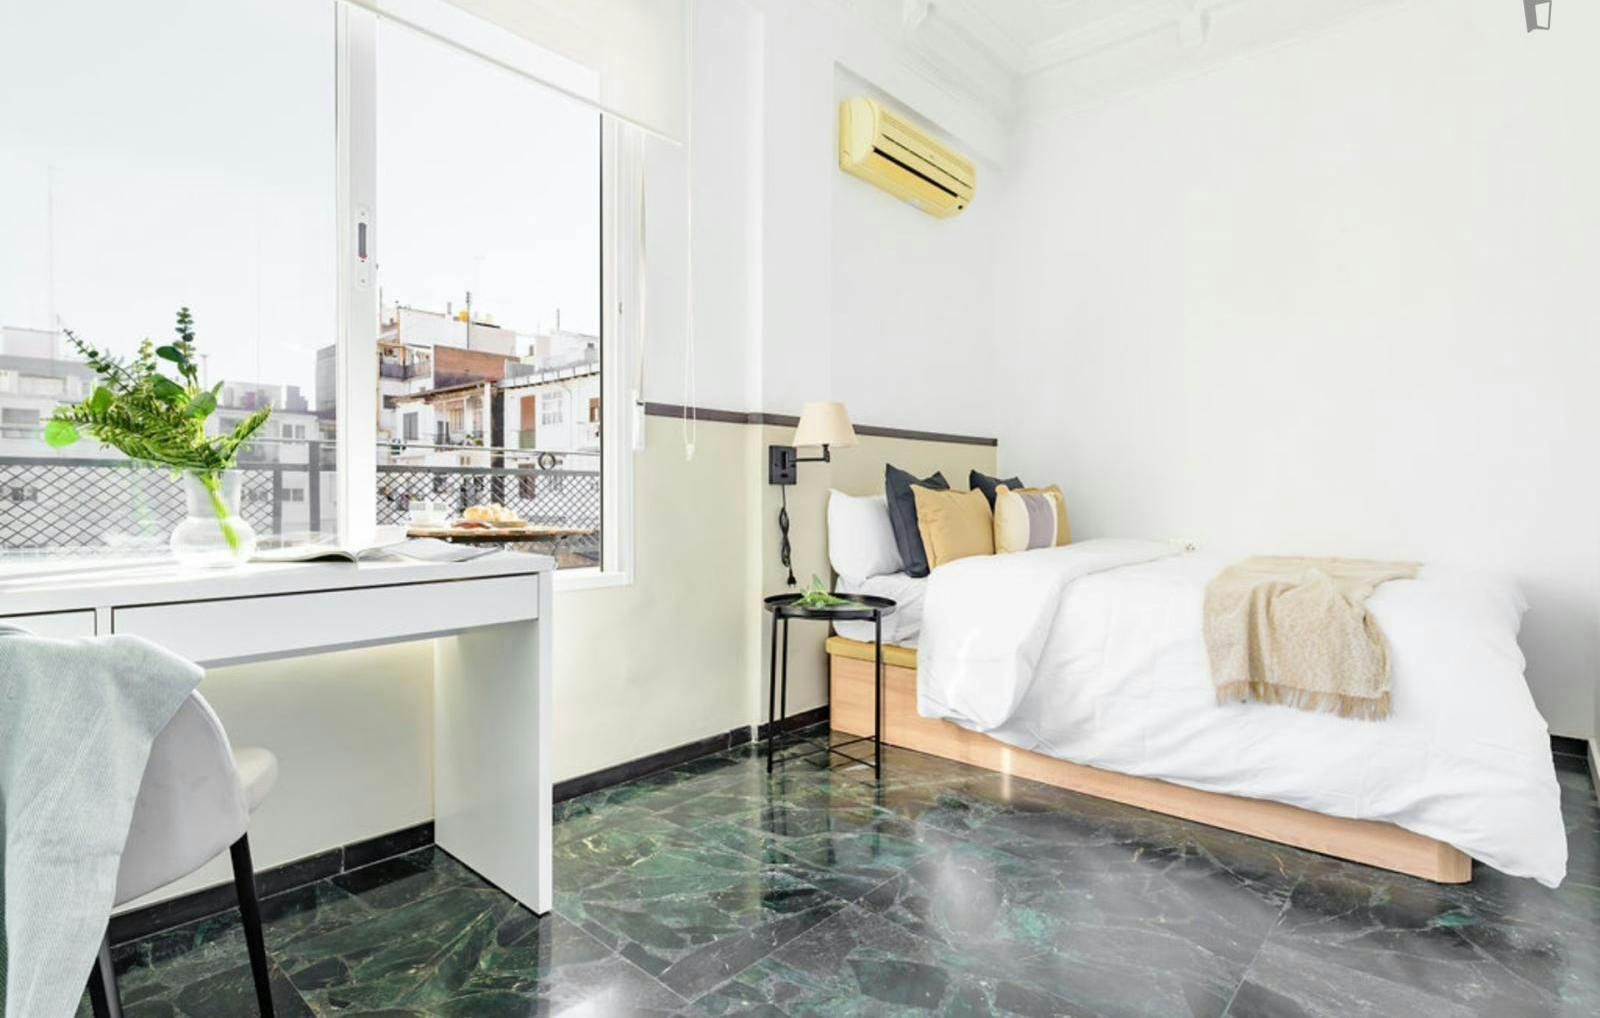 Stupendous double bedroom in the Eixample district